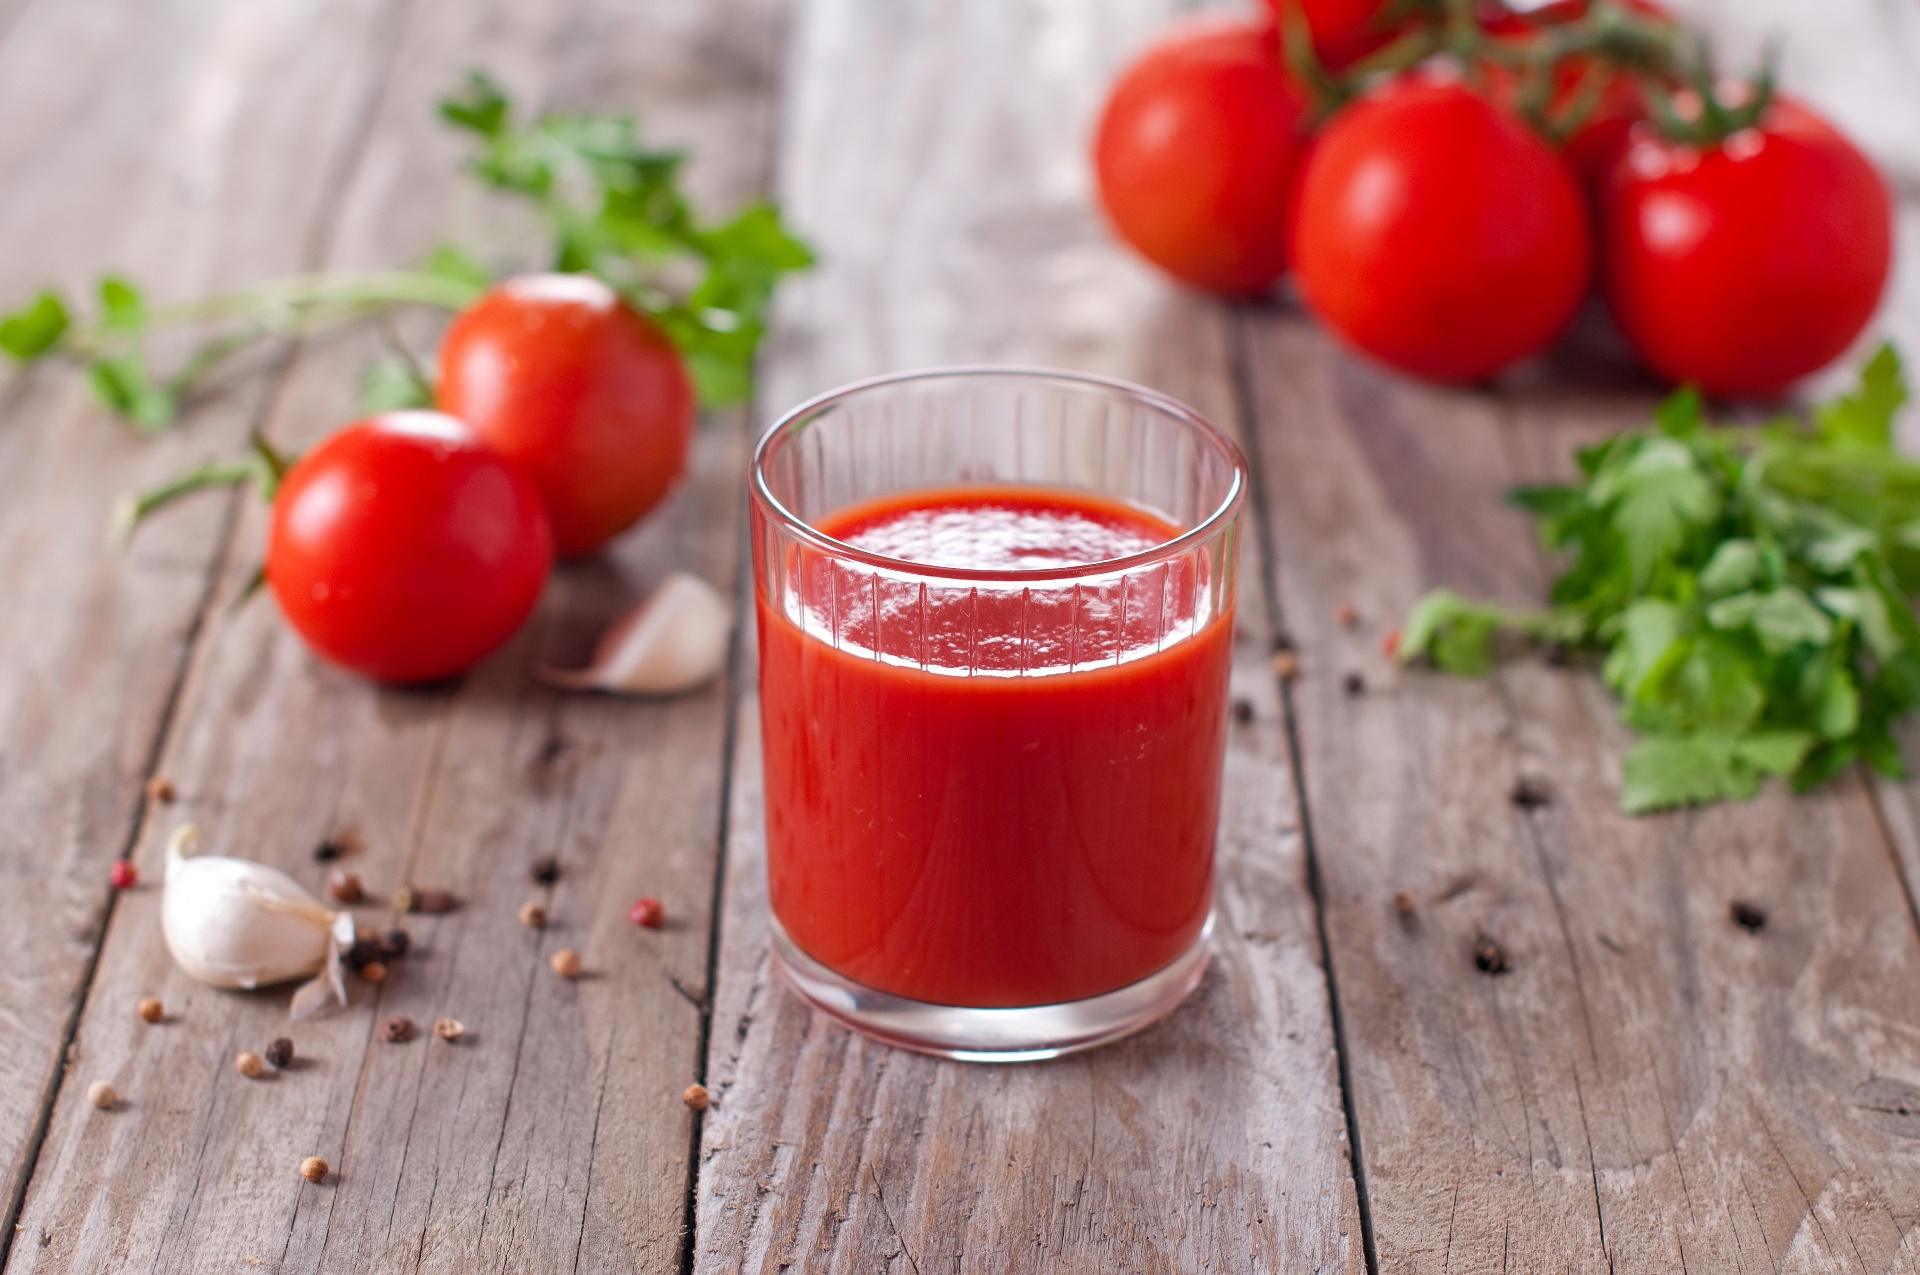 Tomatoes Drinking Glass Food Juice Garlic Black Pepper Spice Wooden Surface Leaves 1920x1275